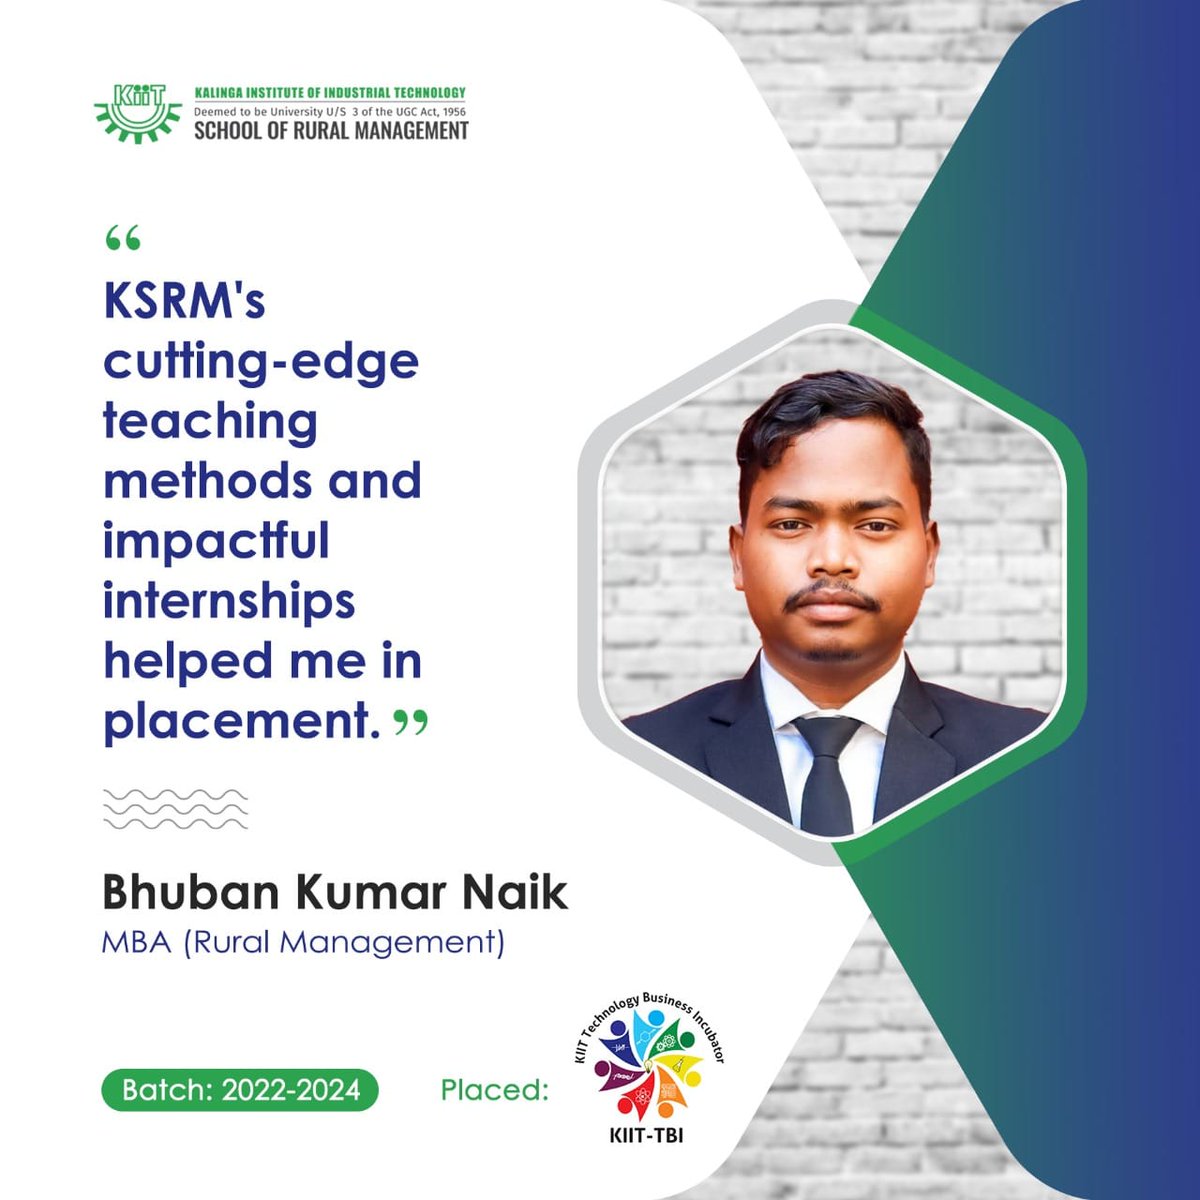 Bhuban, our MBA student at KSRM, tells us how the educational environment and cutting edge teaching methods have helped him with his placements. We congratulate him on his placements! #ksrmbbsr #ruralmanagement #mba #studenttestimonial